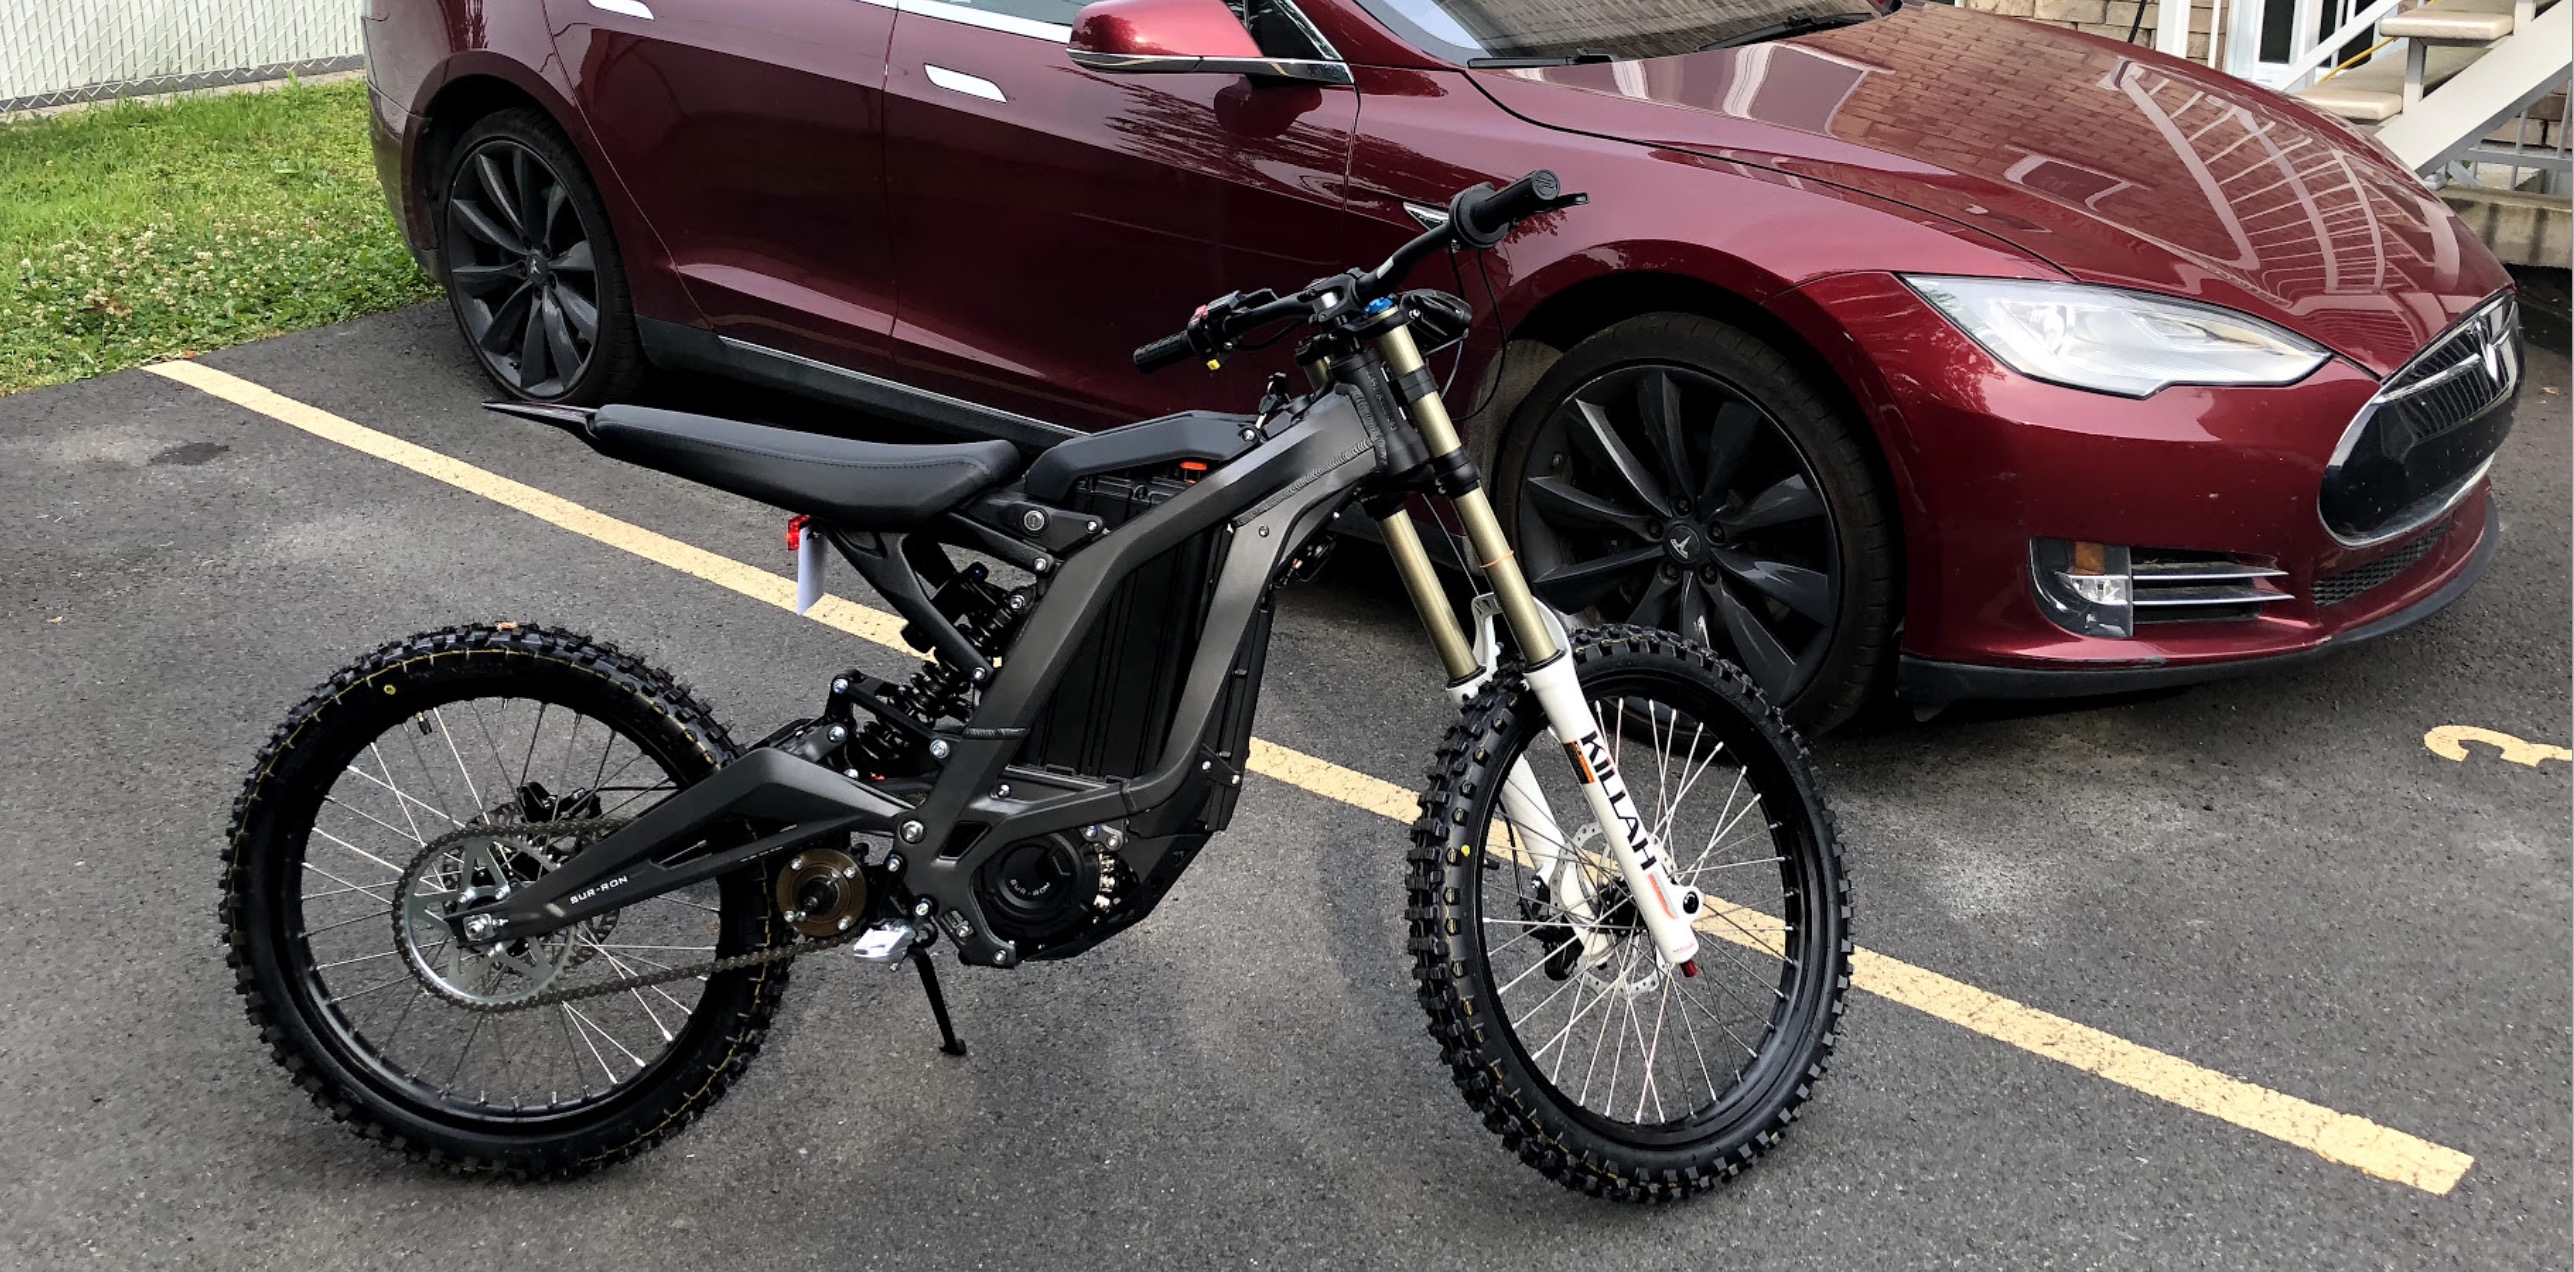 New special edition makes the 45 mph Sur Ron electric bike even more badass